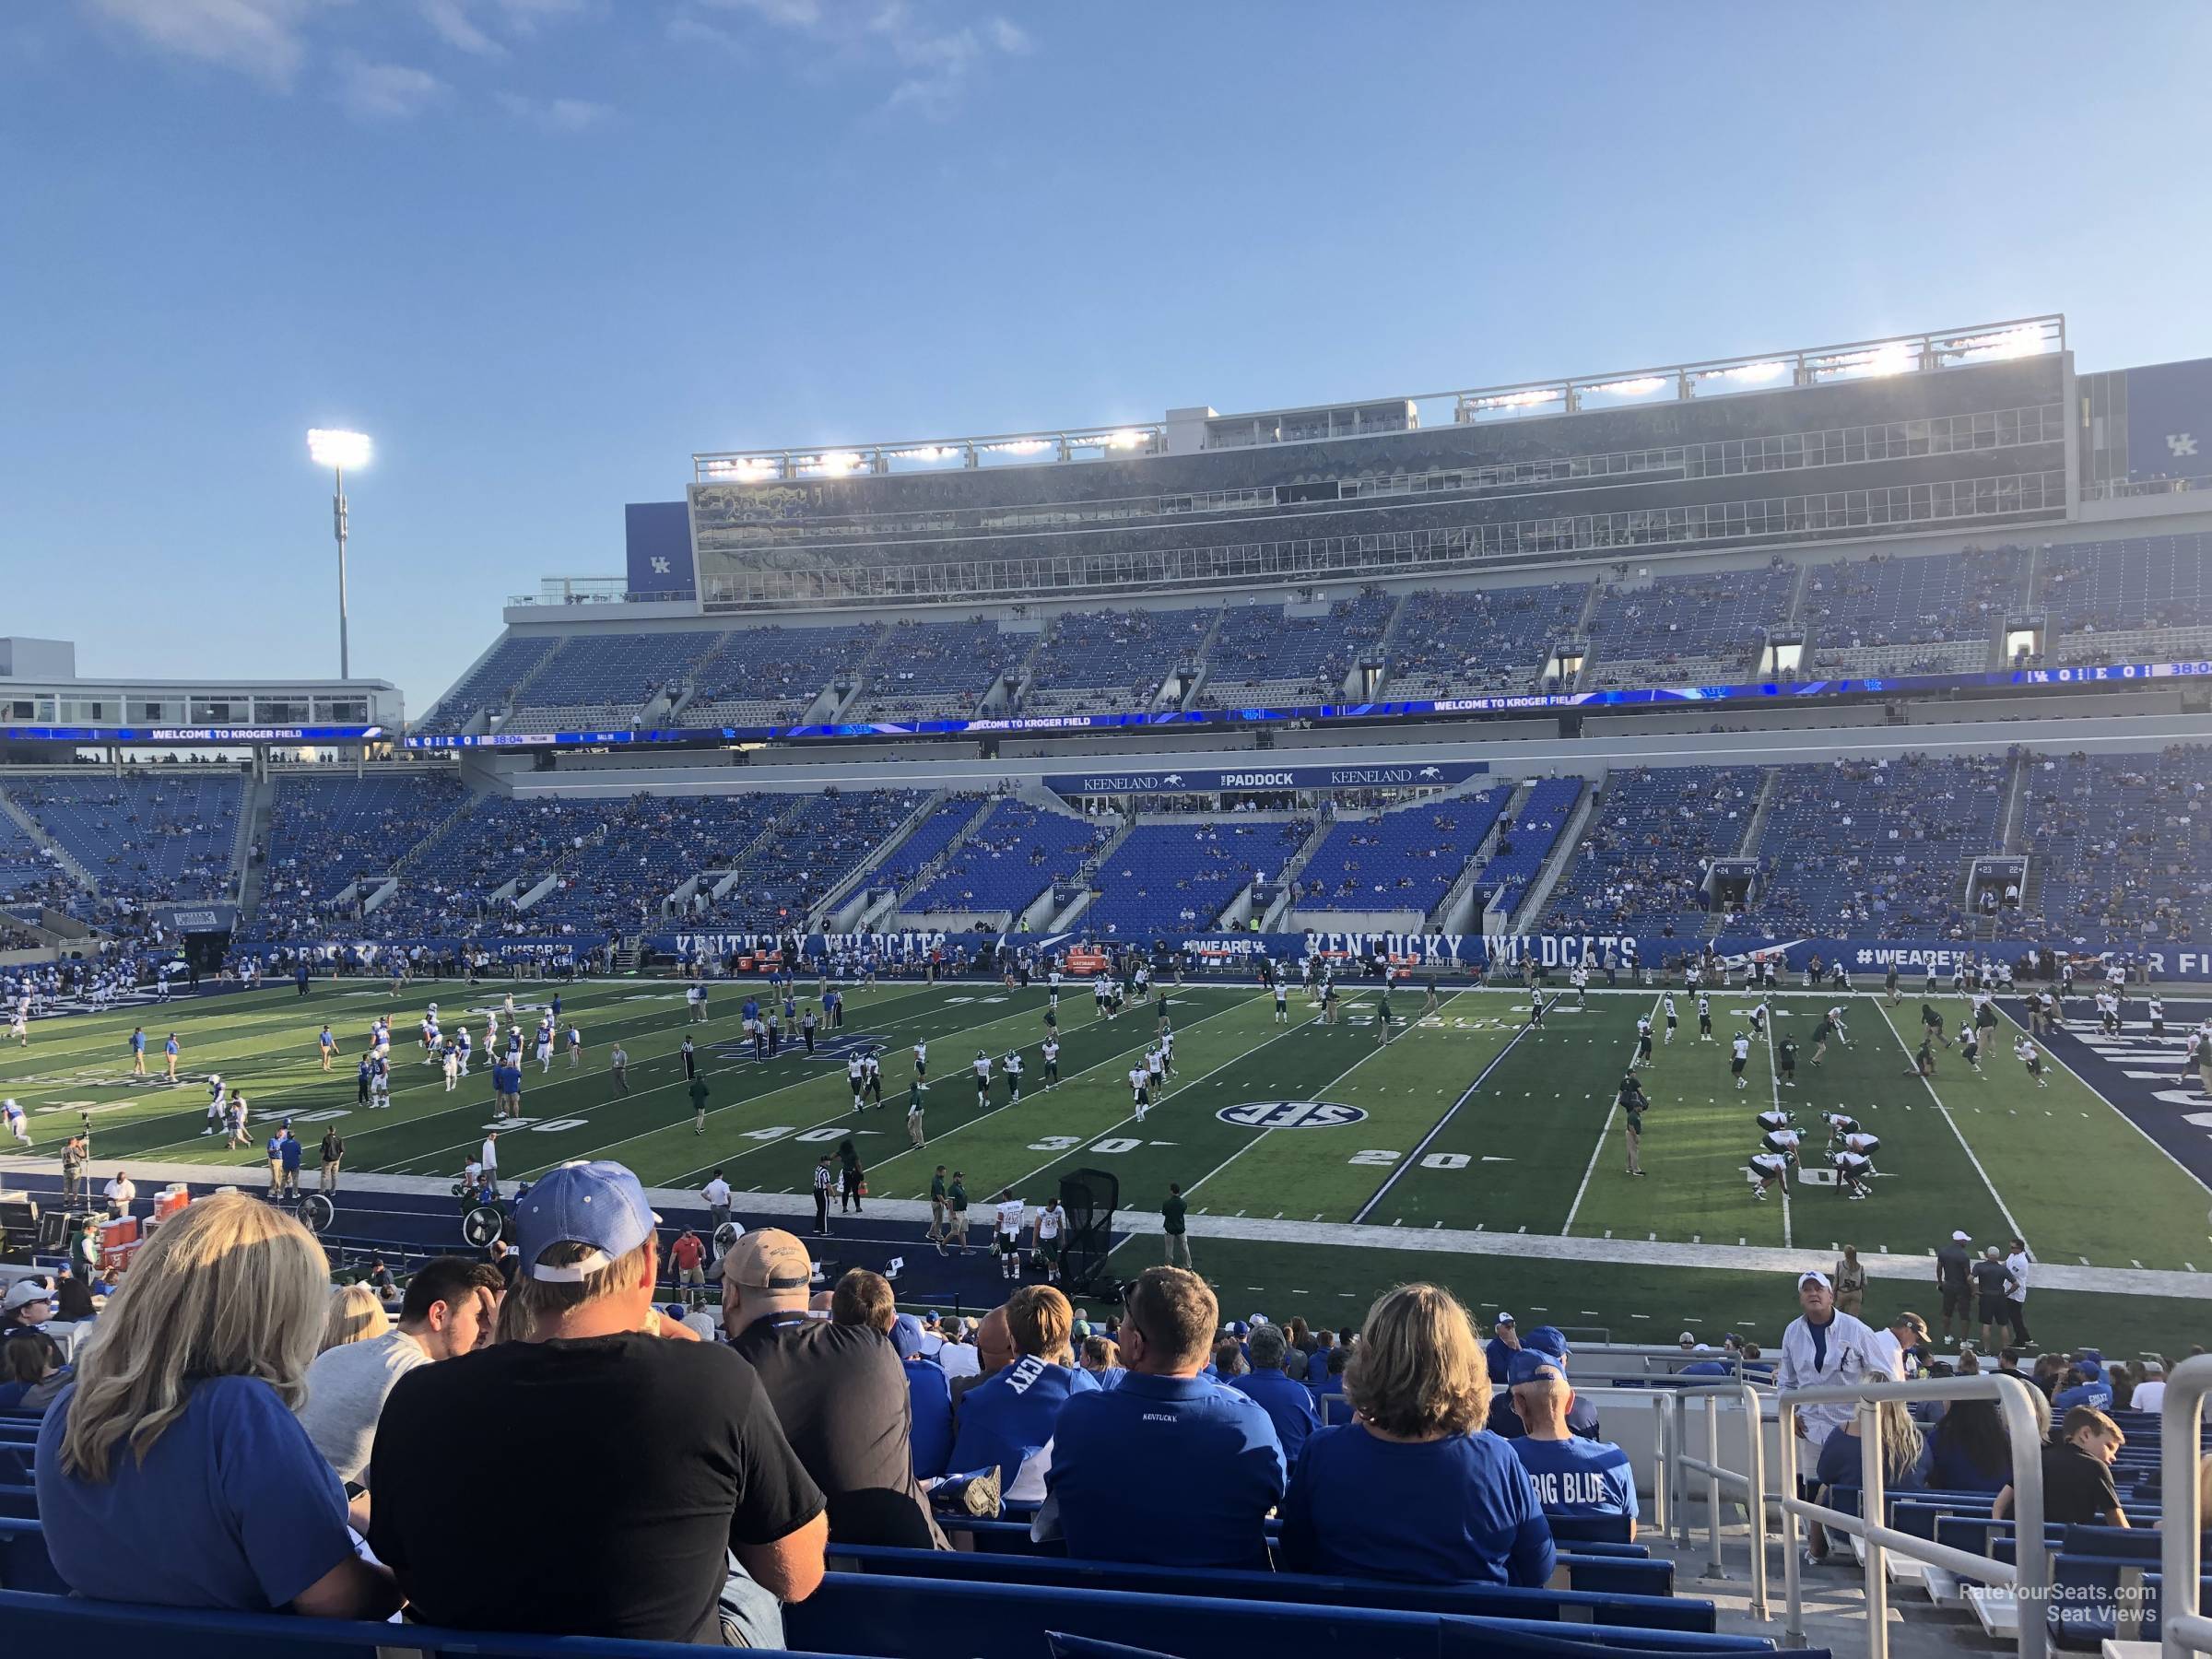 section 8, row 35 seat view  - kroger field